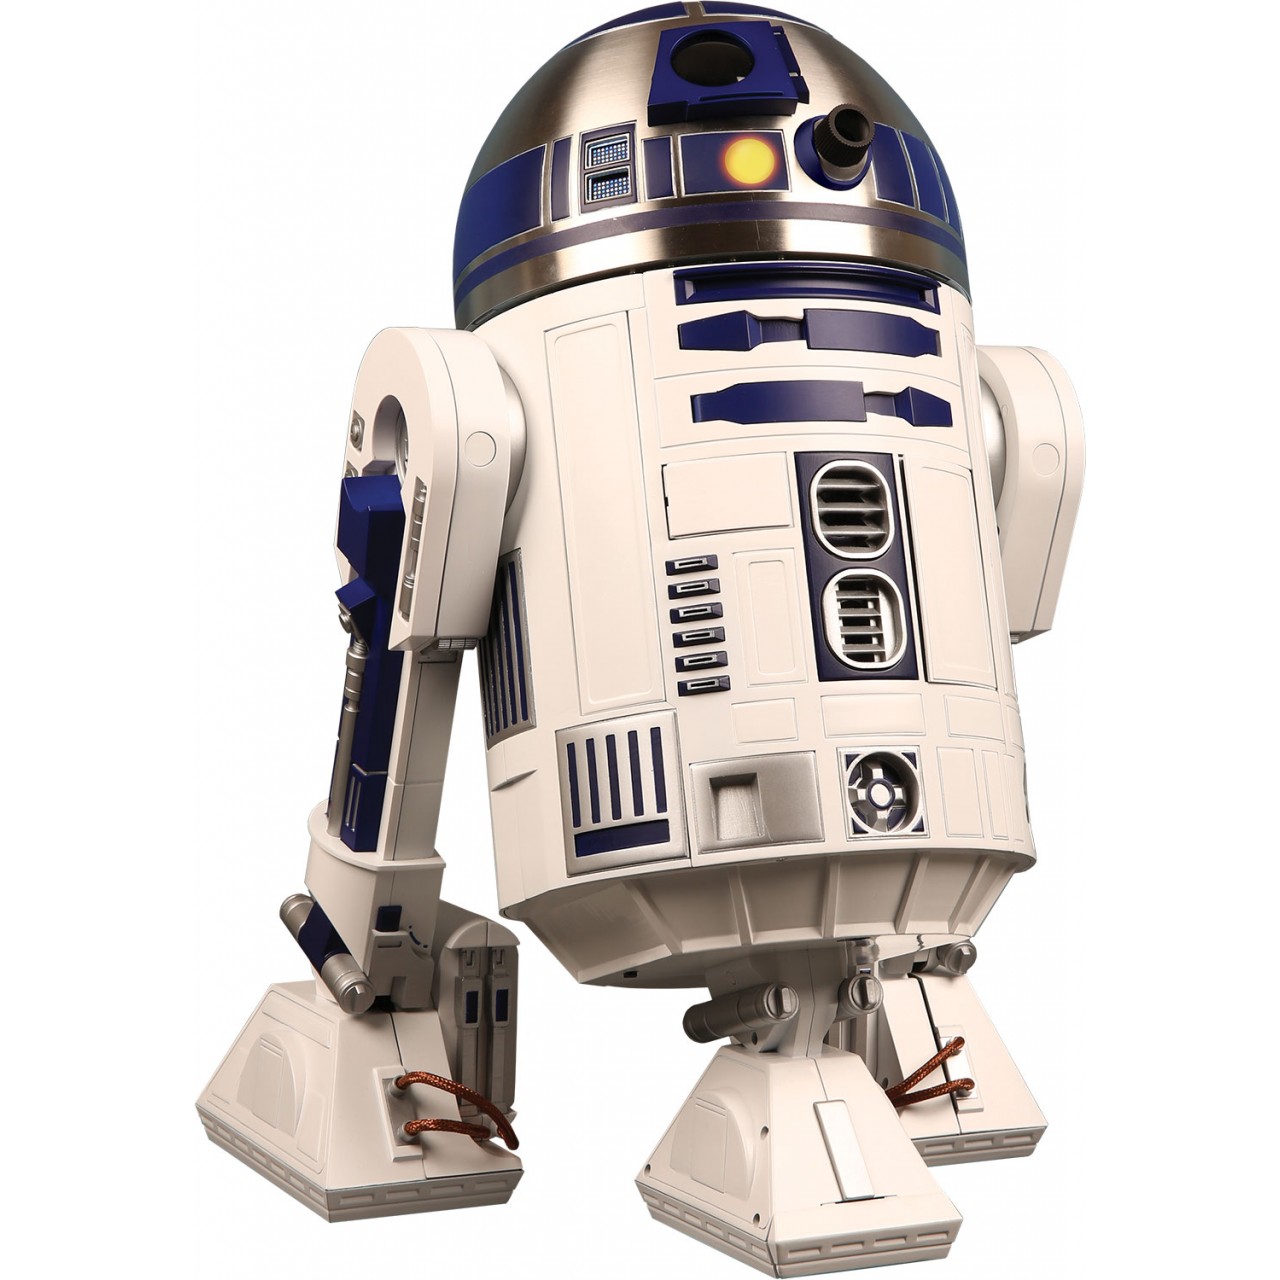 R2-D2 is the Star Wars Robot